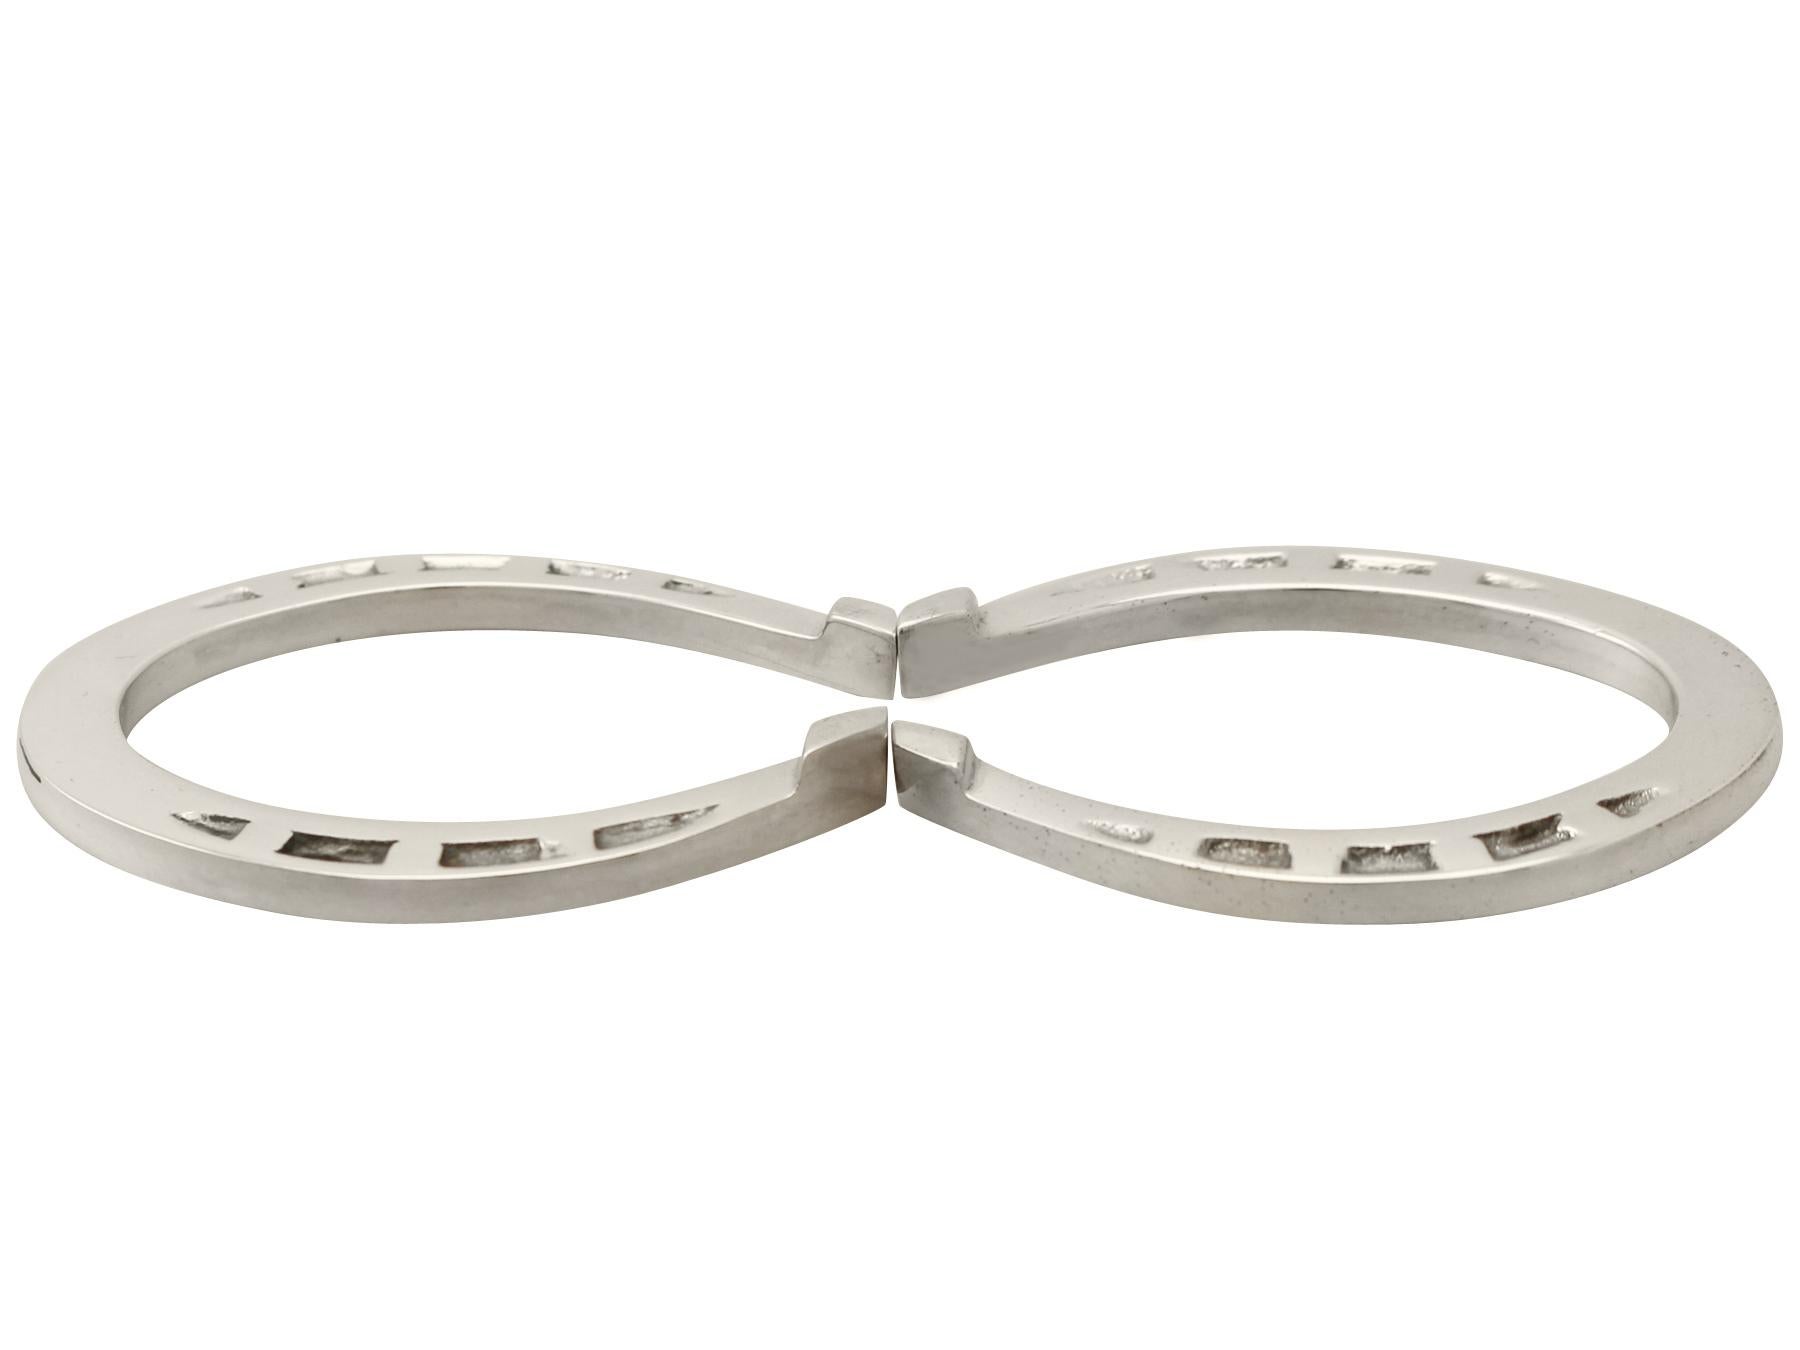 Boxed English Sterling Silver Napkin Rings in the Form of Horseshoes 1